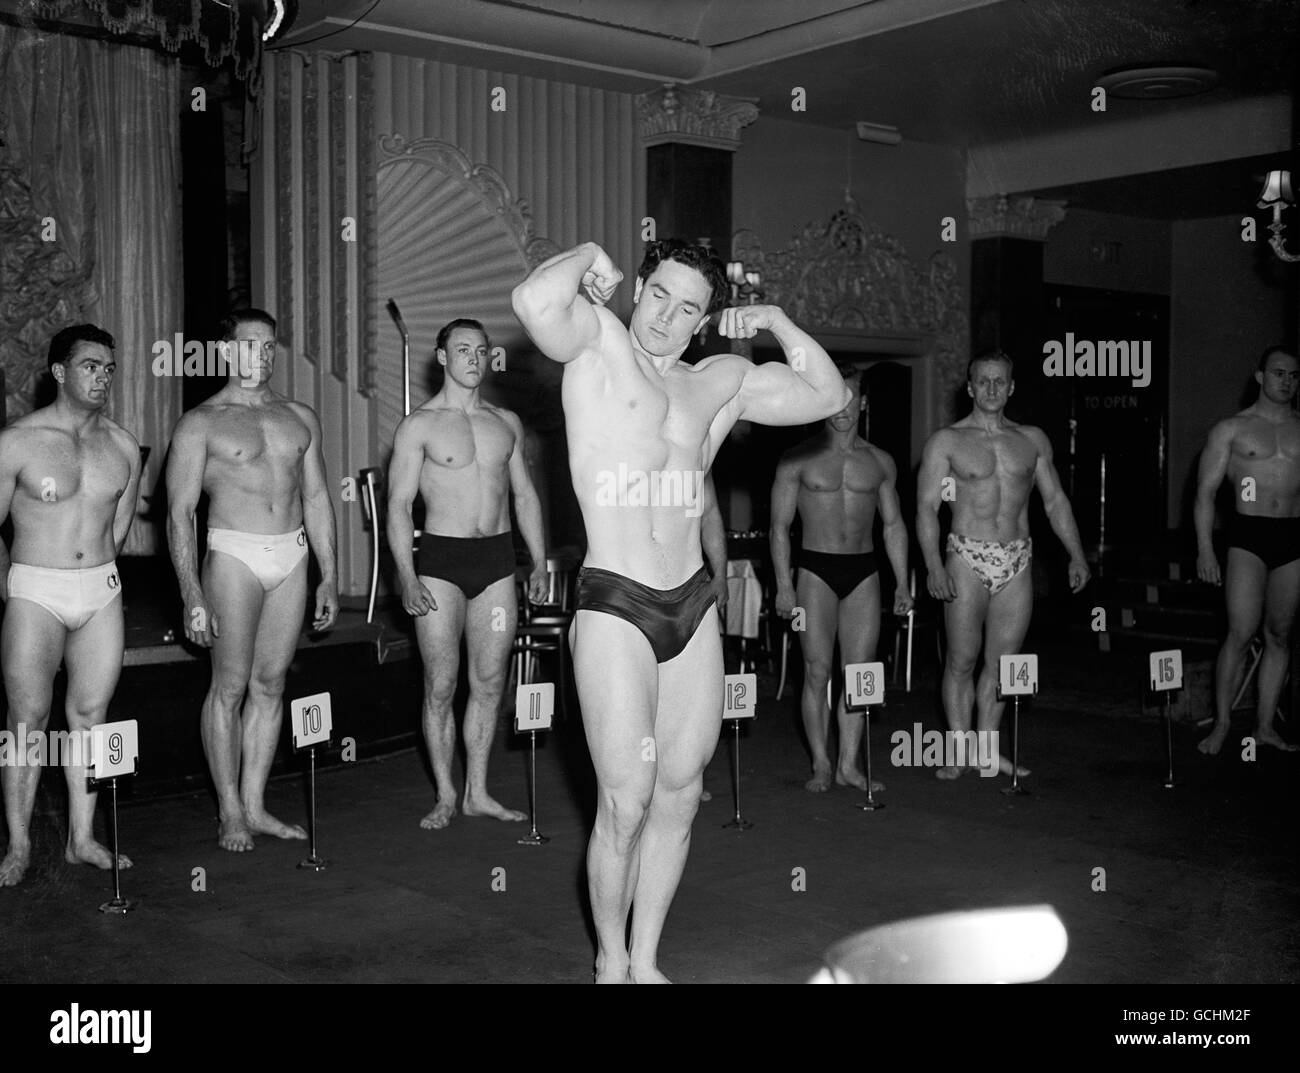 Britains Pefect Men Competition - Finals. Herbert Thomas, aged 24 demonstrates body control Stock Photo